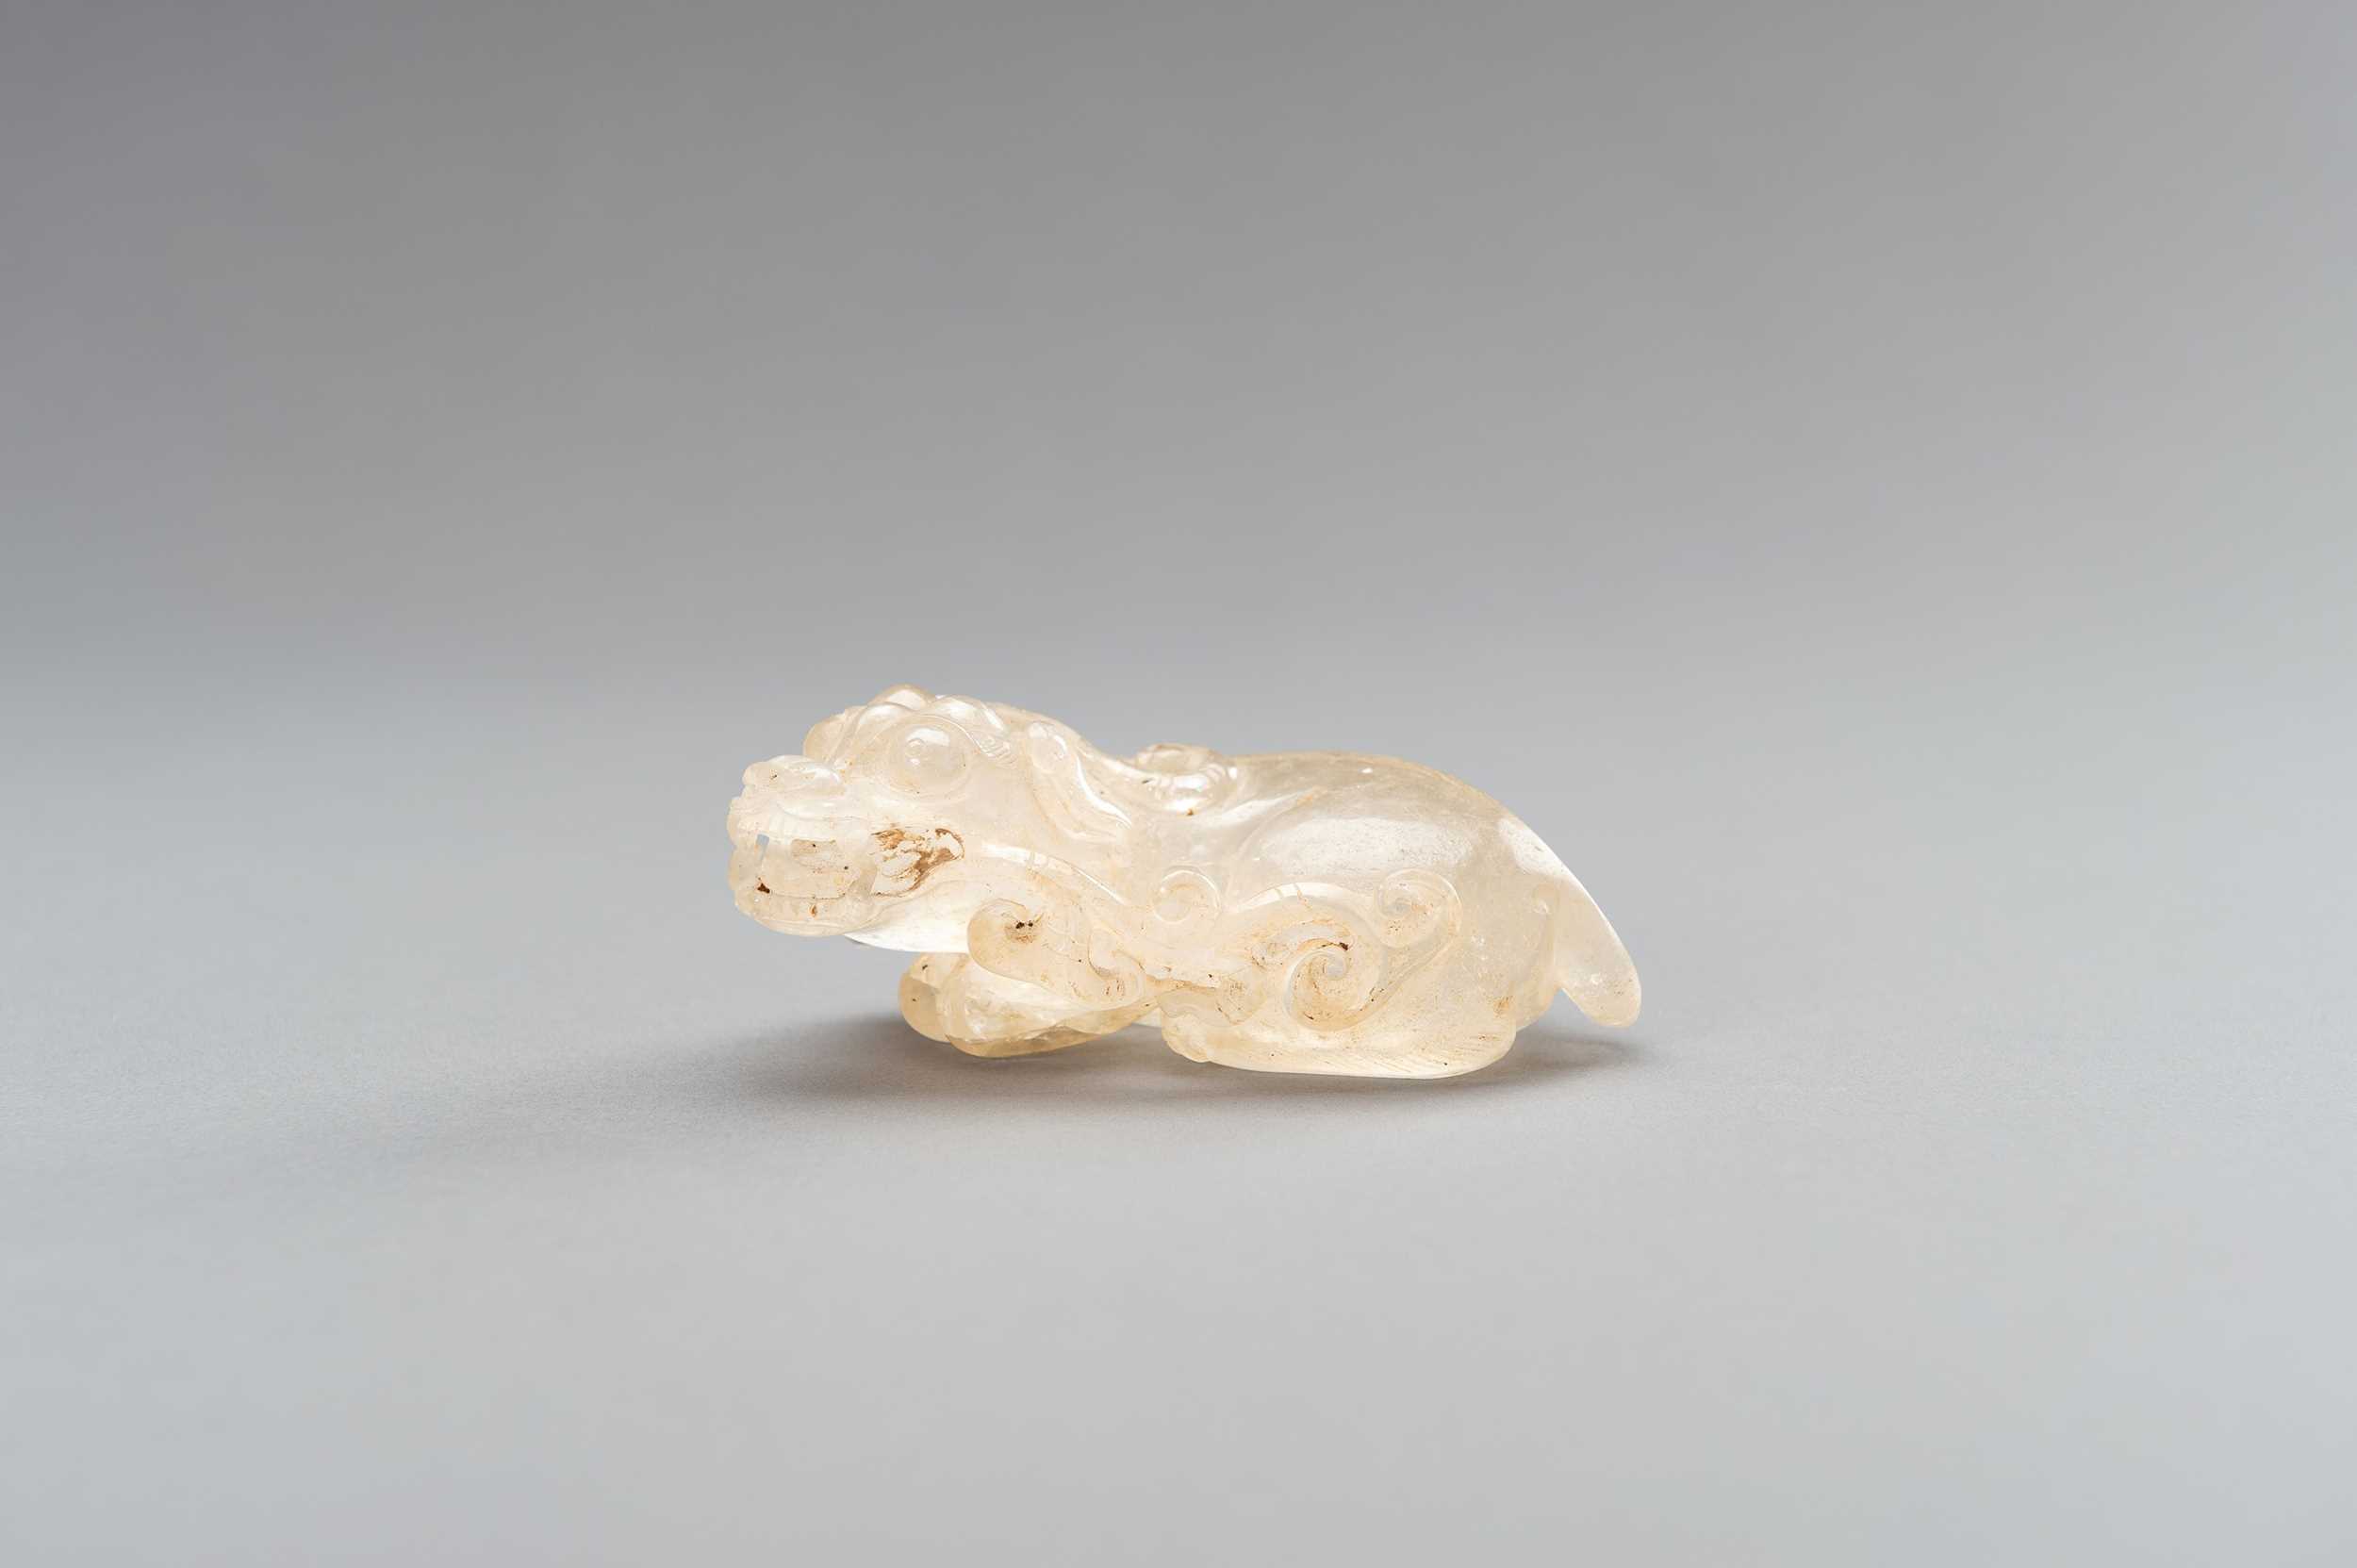 Lot 178 - A FINE ROCK CRYSTAL ‘BIXIE AND LINGZHI’ GROUP, QING DYNASTY